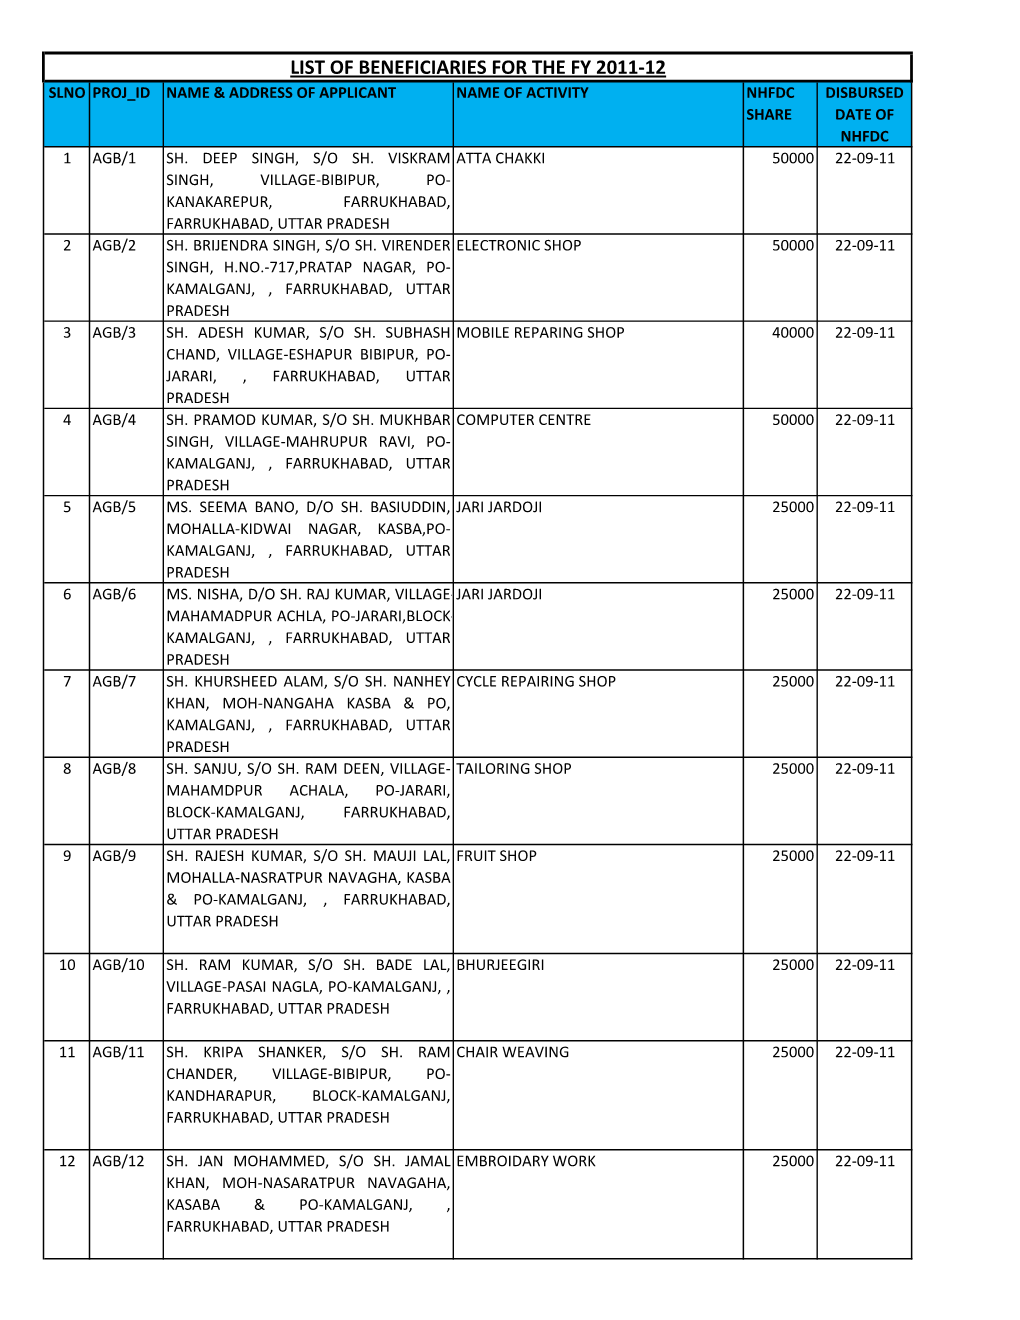 List of Beneficiaries for the Fy 2011-12 Slno Proj Id Name & Address of Applicant Name of Activity Nhfdc Disbursed Share Date of Nhfdc 1 Agb/1 Sh